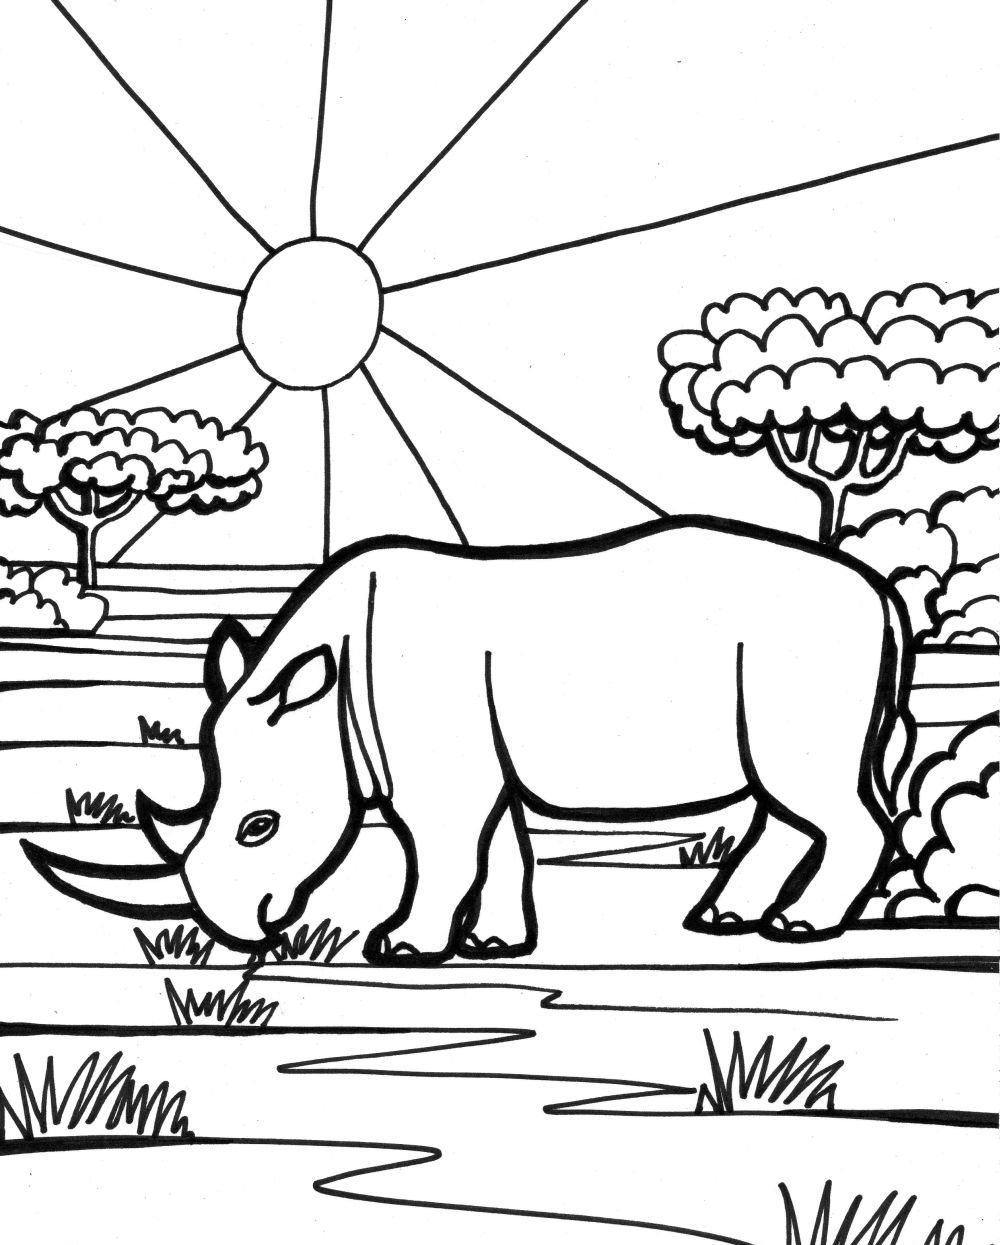 Rhino Free Animal S For Kids0897 Coloring Page